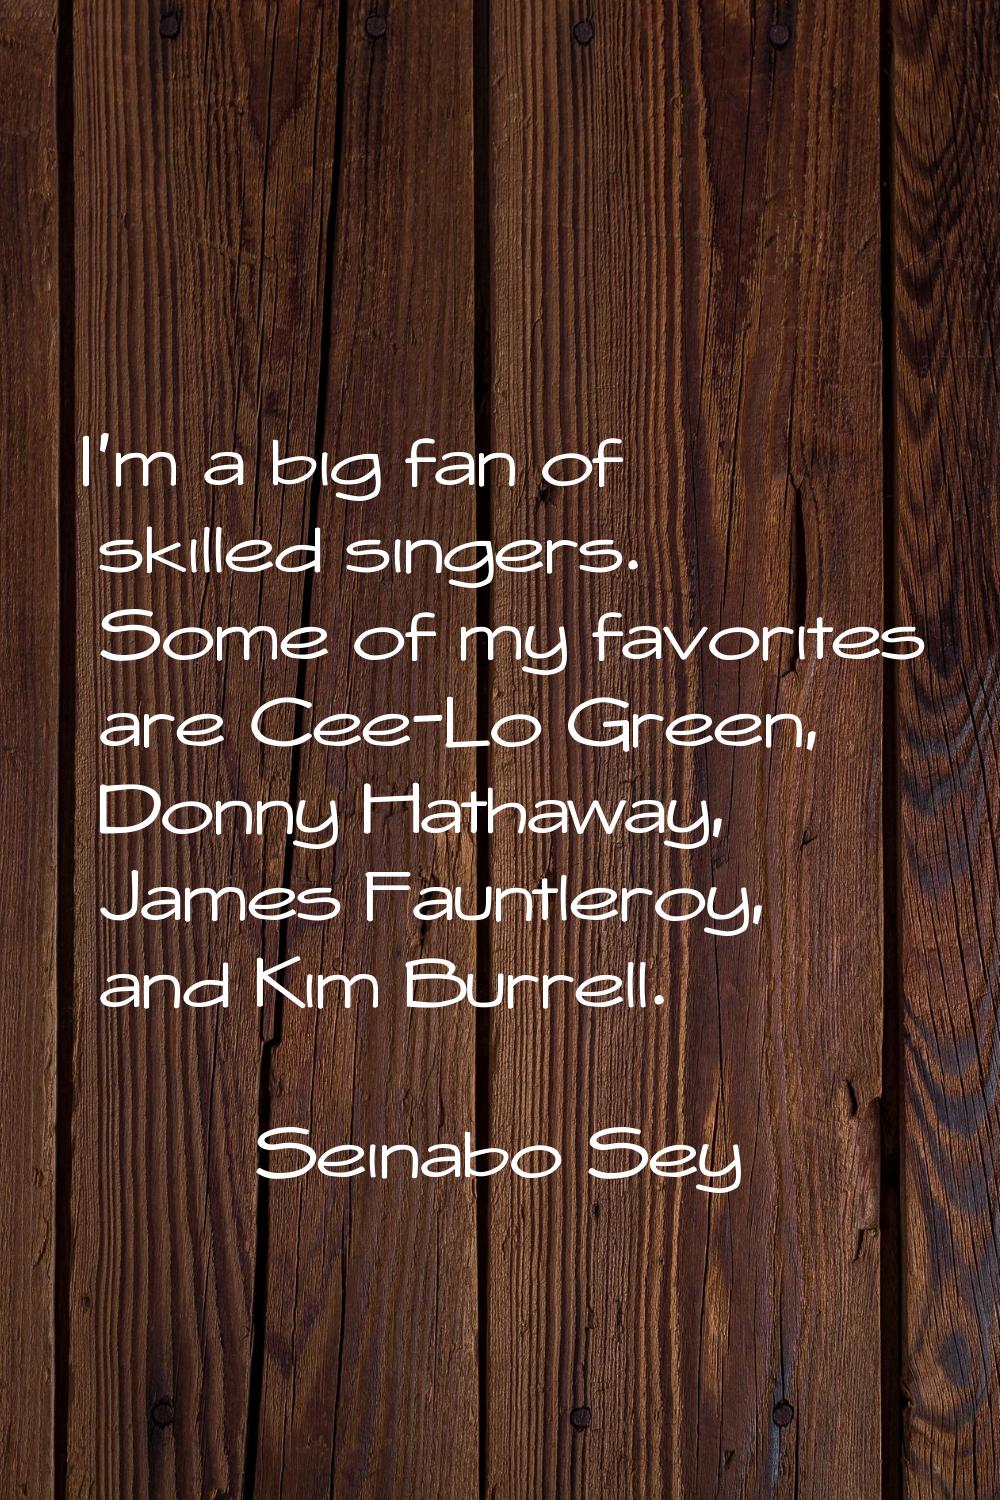 I'm a big fan of skilled singers. Some of my favorites are Cee-Lo Green, Donny Hathaway, James Faun